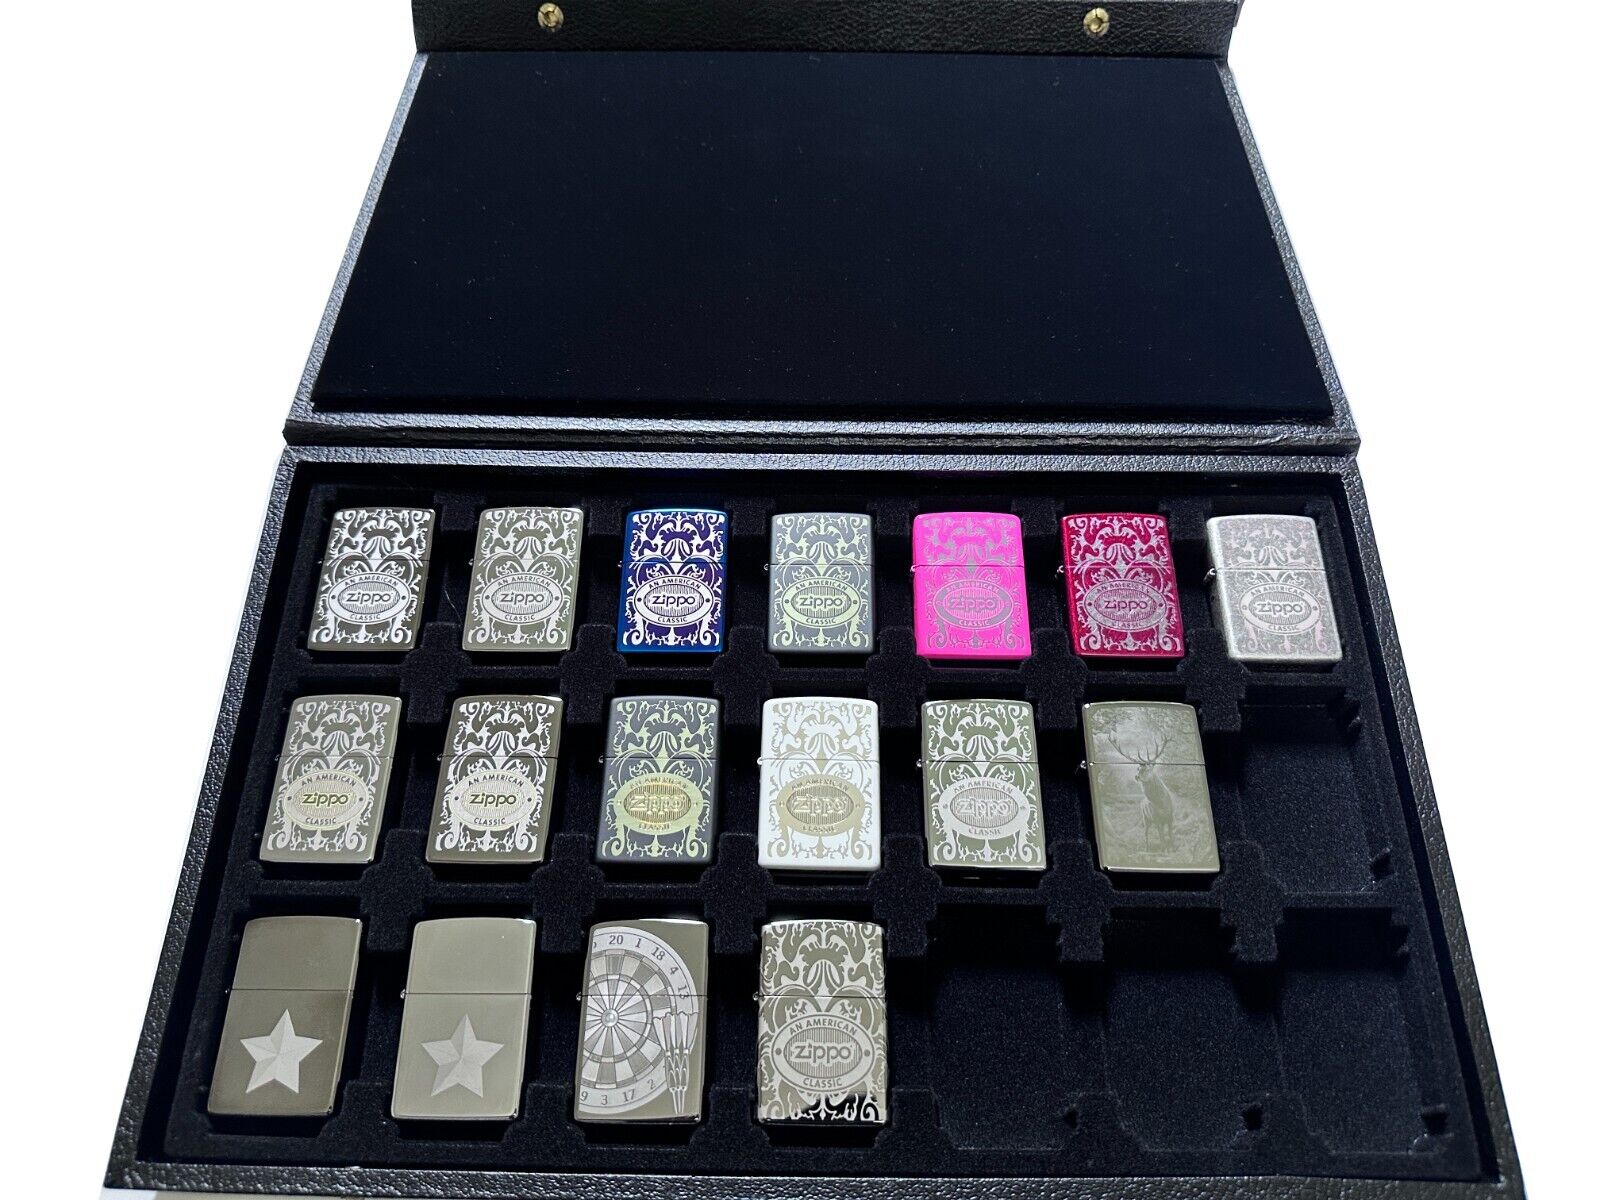 Zippo Highly Collectible Show-Case with 17 Original Lighters -Not Sold Anywhere